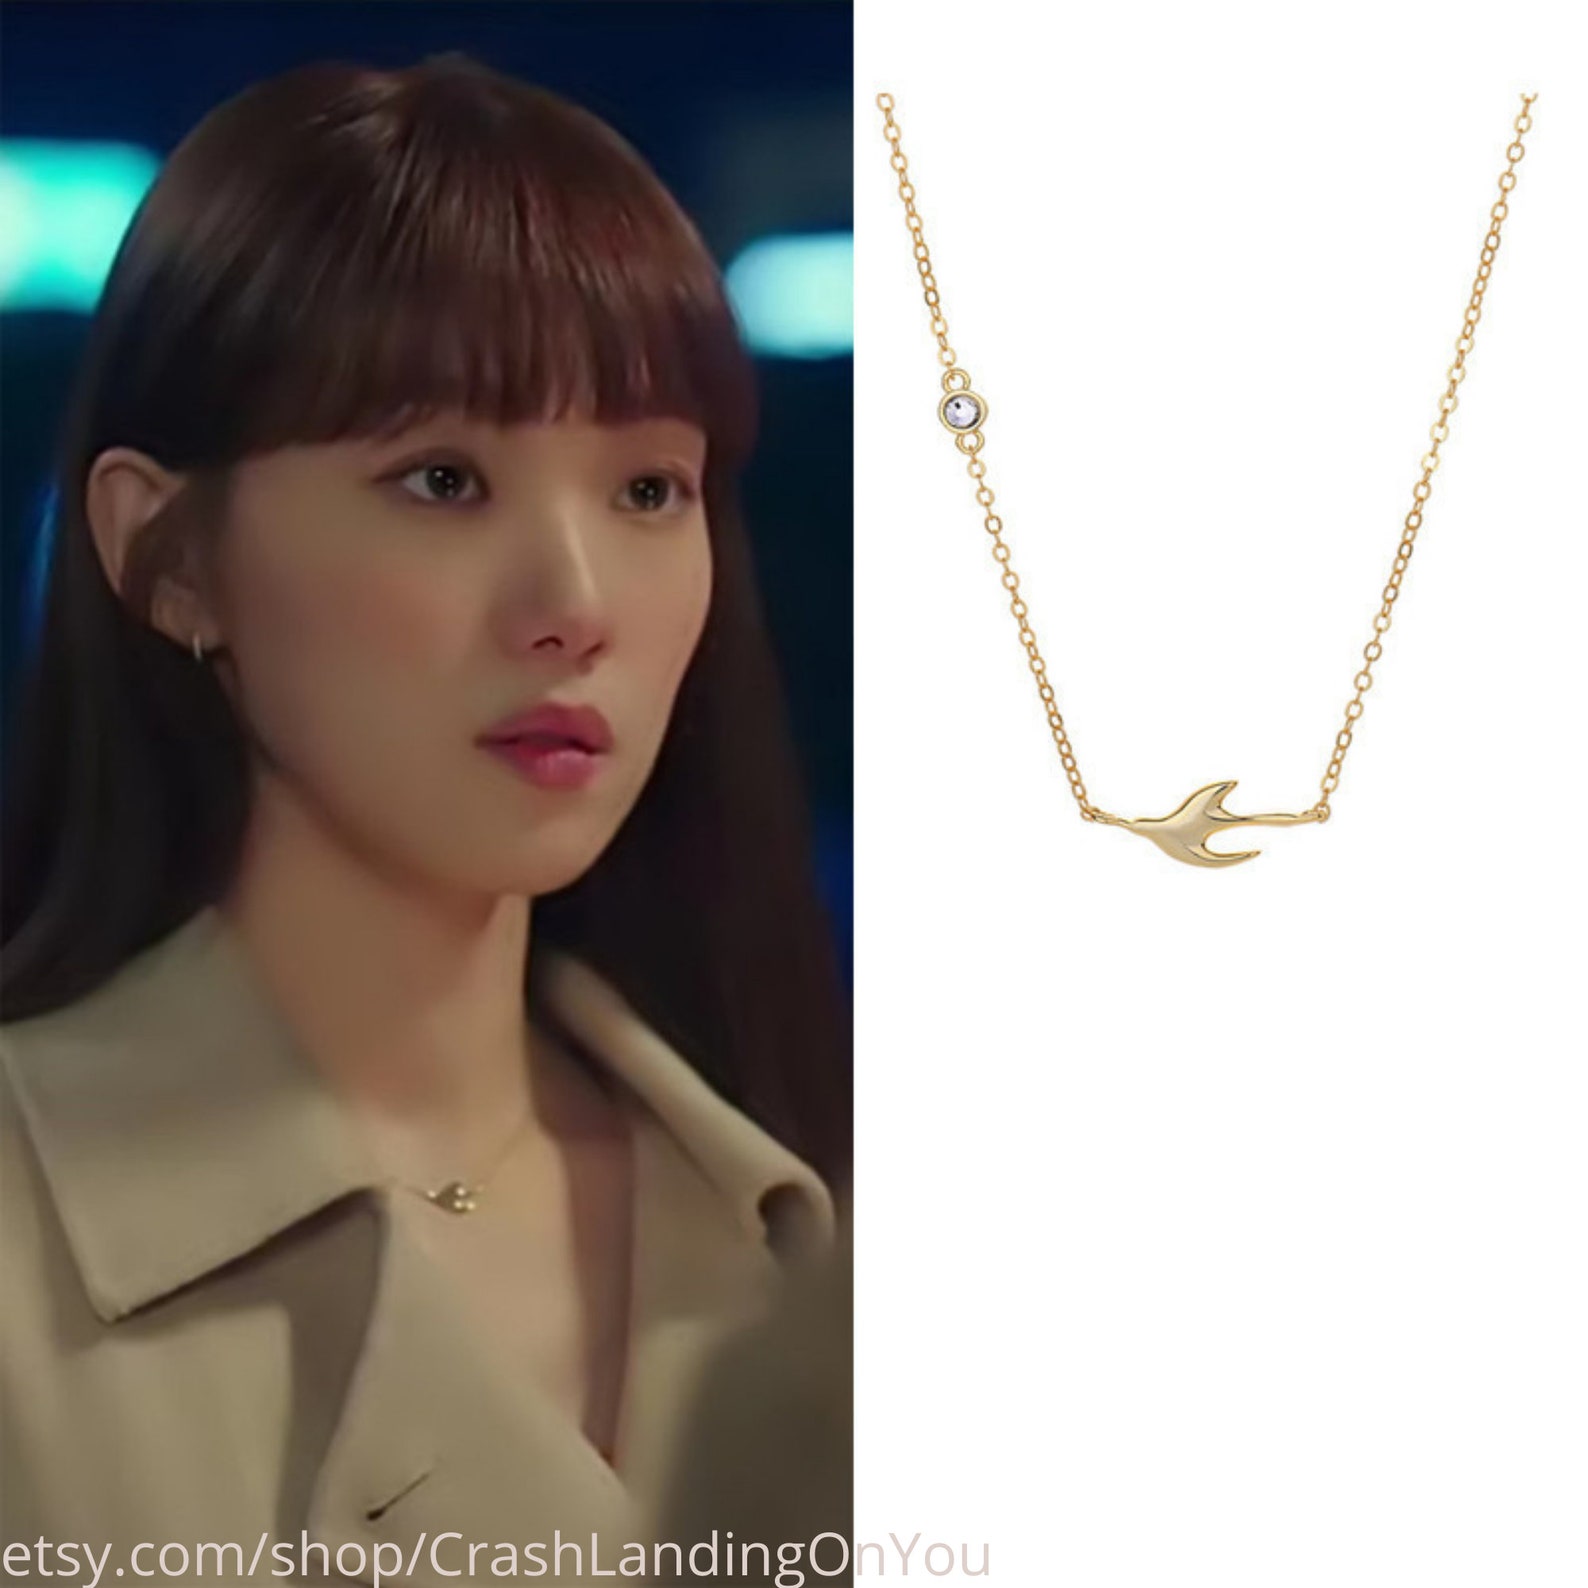 Sparrow Necklace as Seen on Lee Sung Kyung Shooting Stars - Etsy